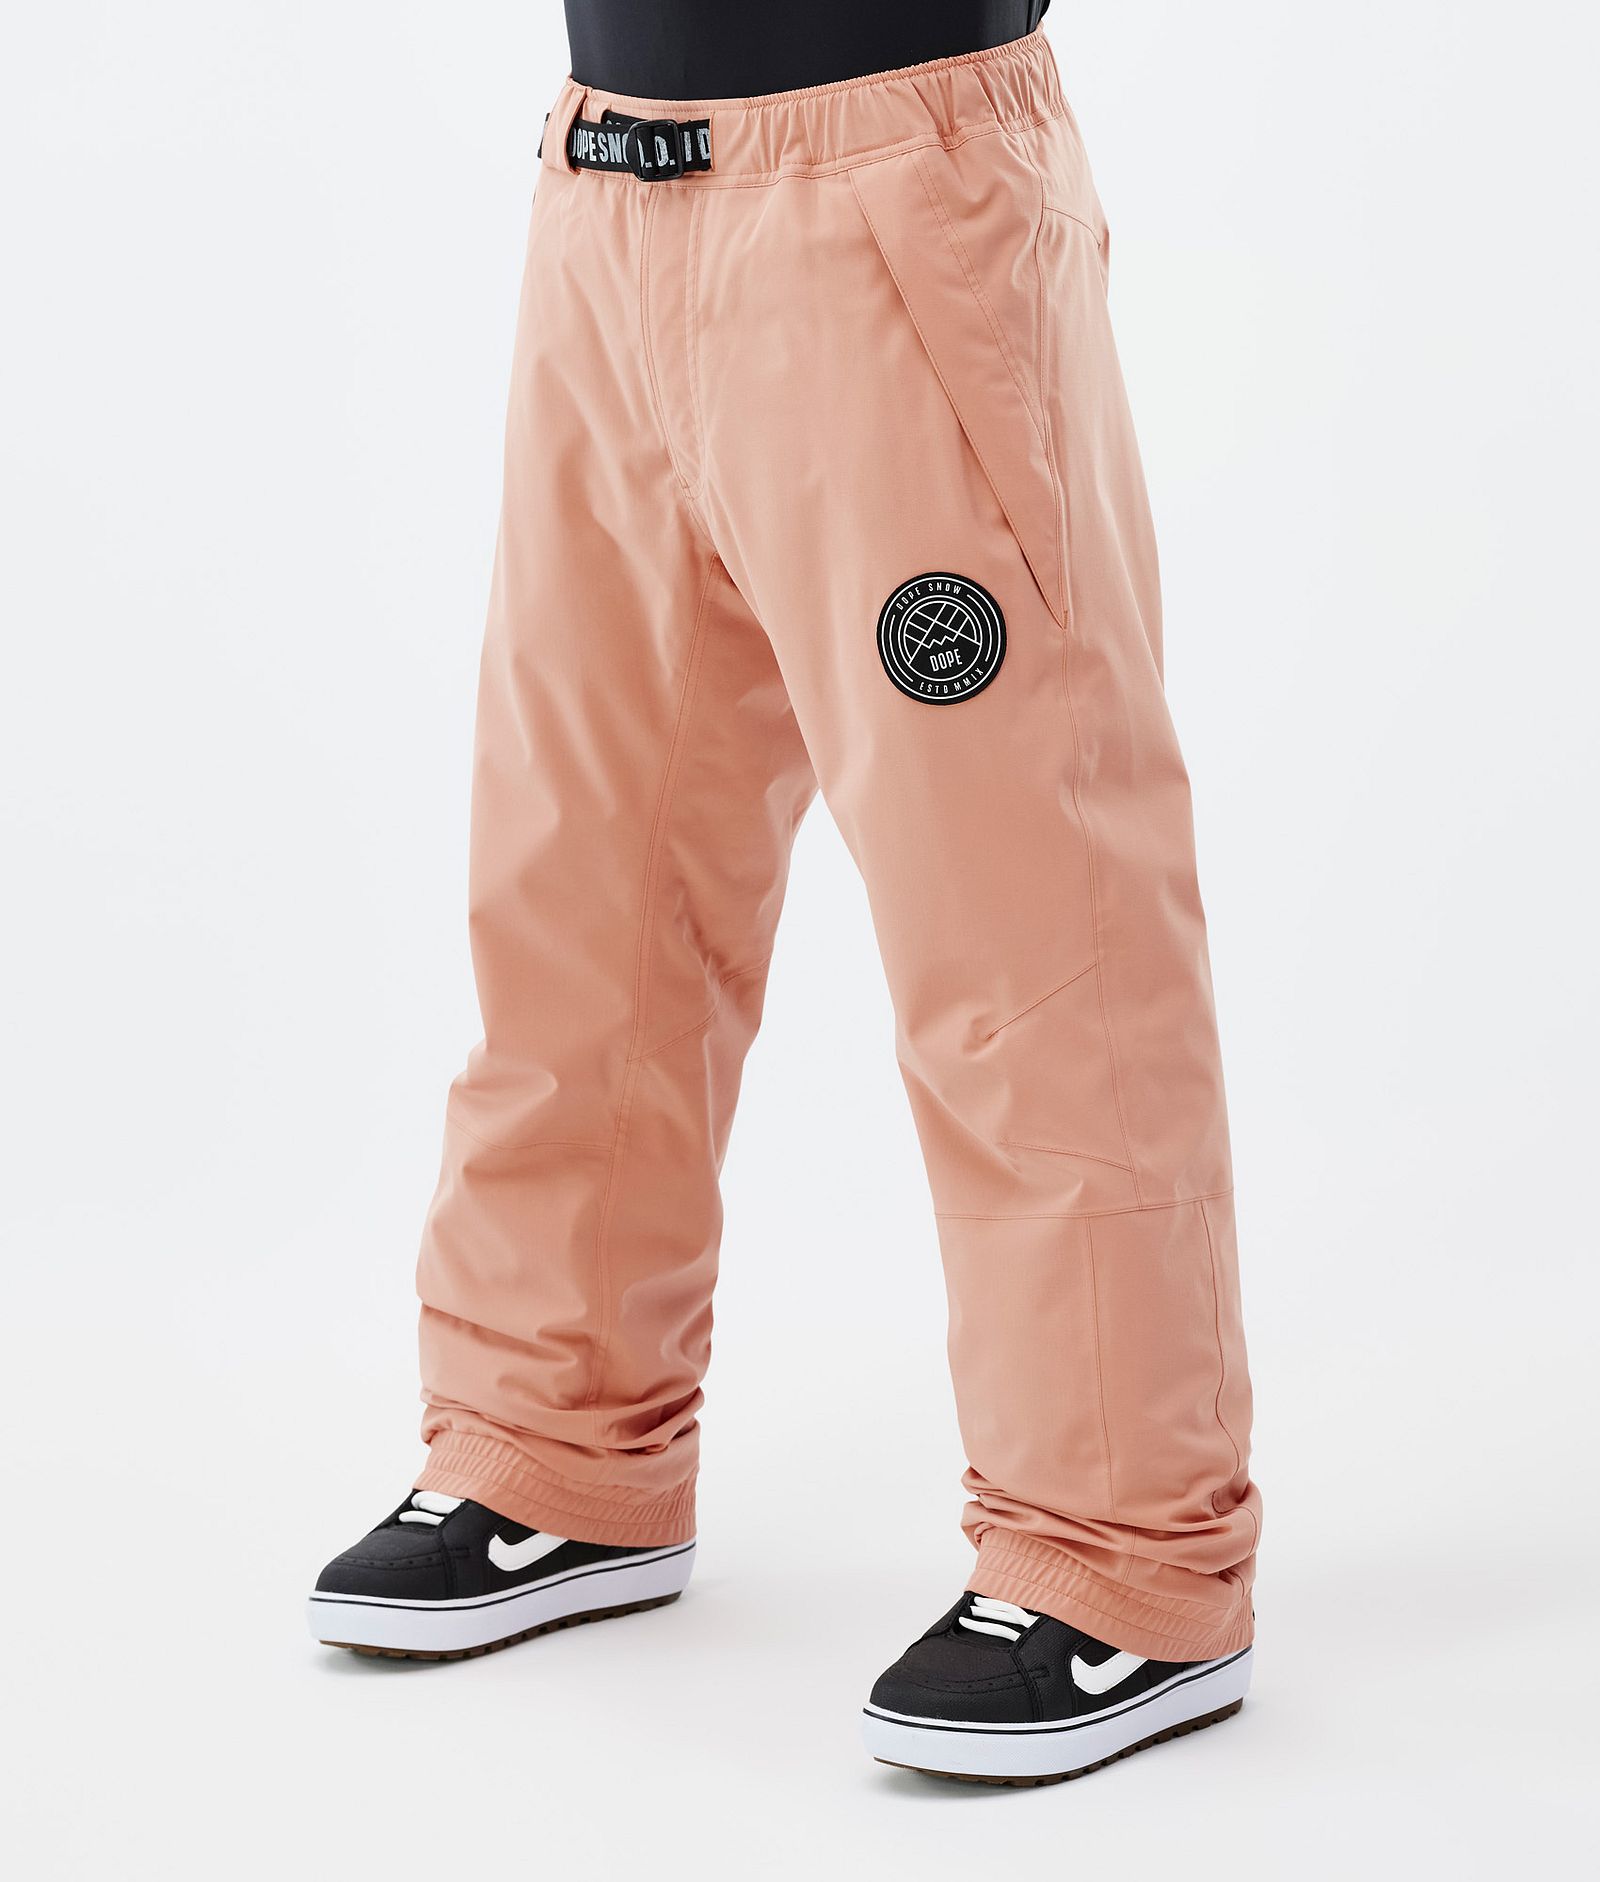 Dope Blizzard Snowboard Pants Men Faded Peach, Image 1 of 5